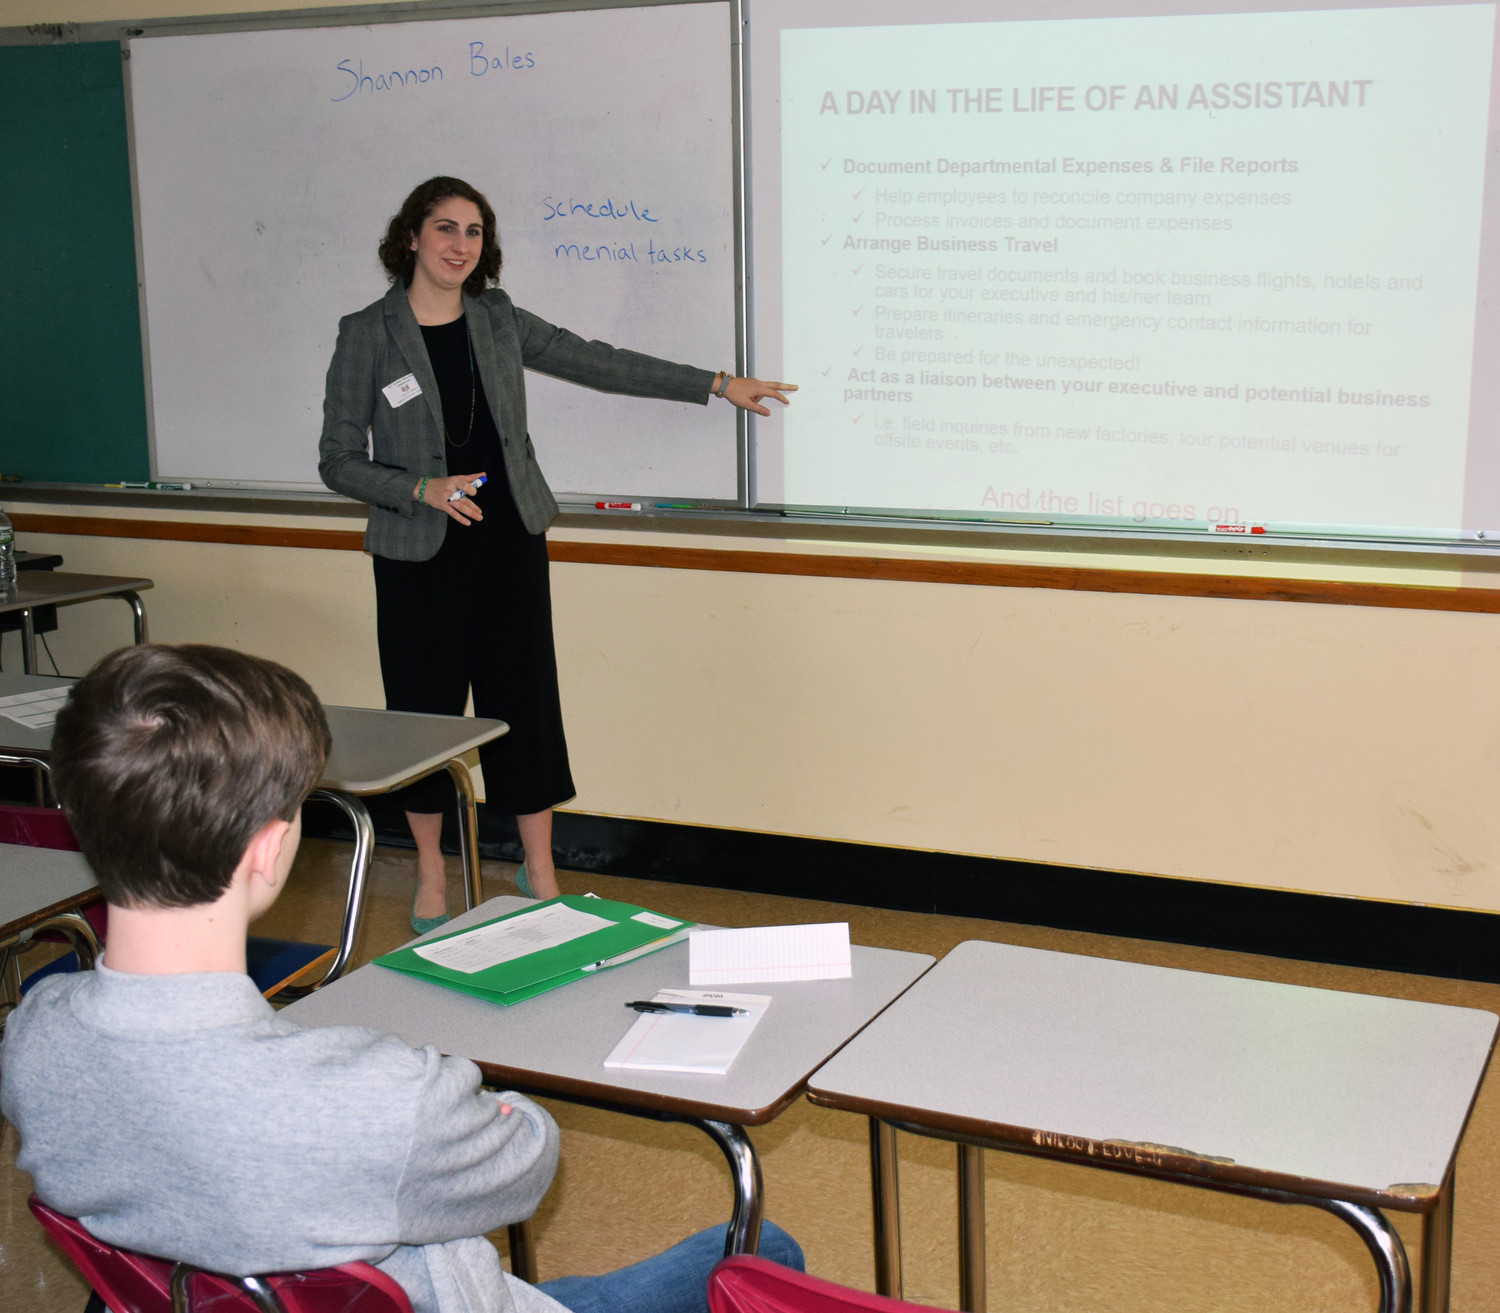 W.T. Clarke High School alumna Shannon Bales shared her experience as a fashion executive assistant with students during the school’s first Career Day.